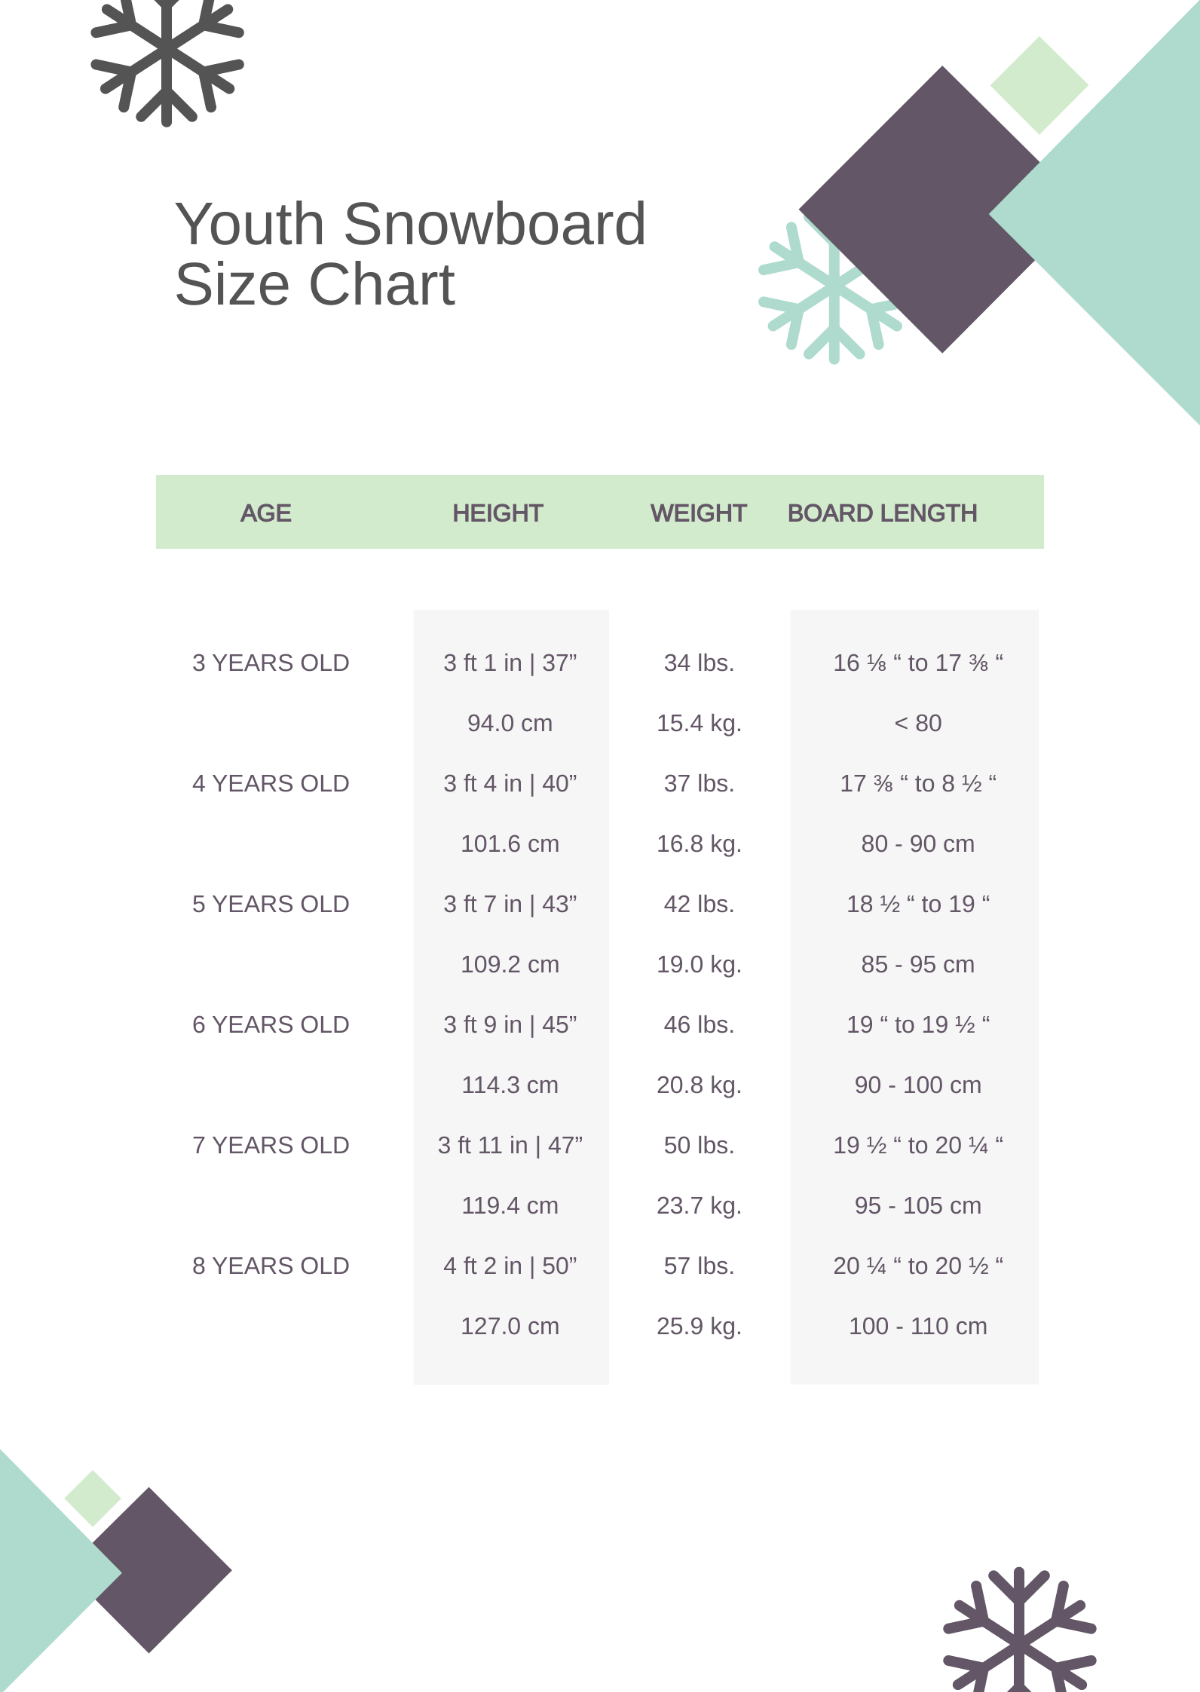 Youth Snowboard Size Chart